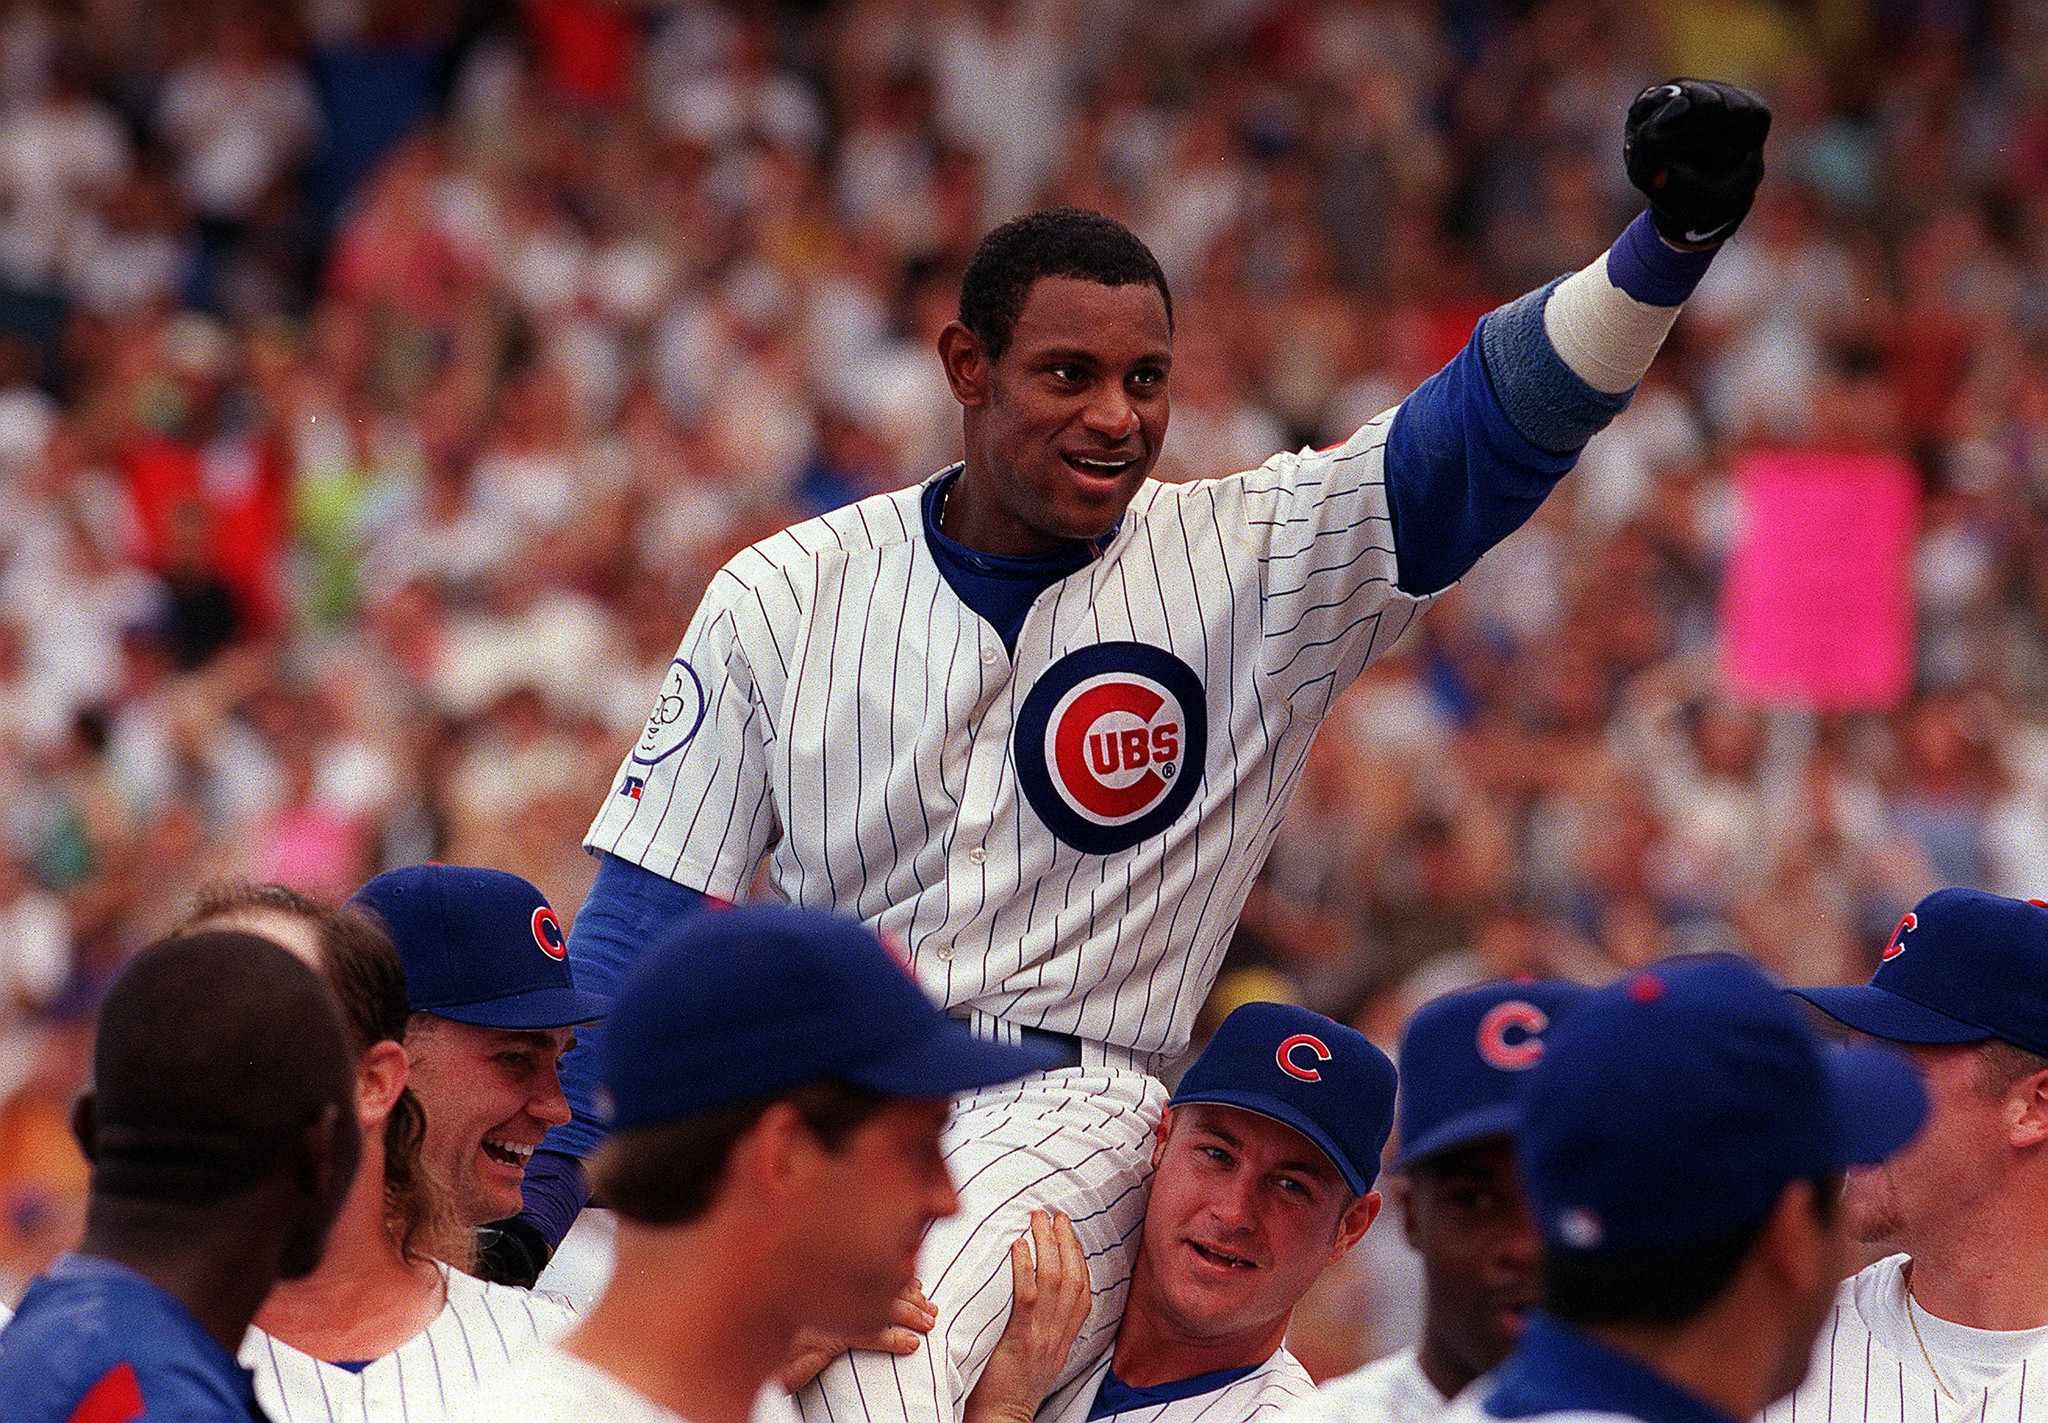 Criteria for being elected to the Chicago Cubs Hall of Fame